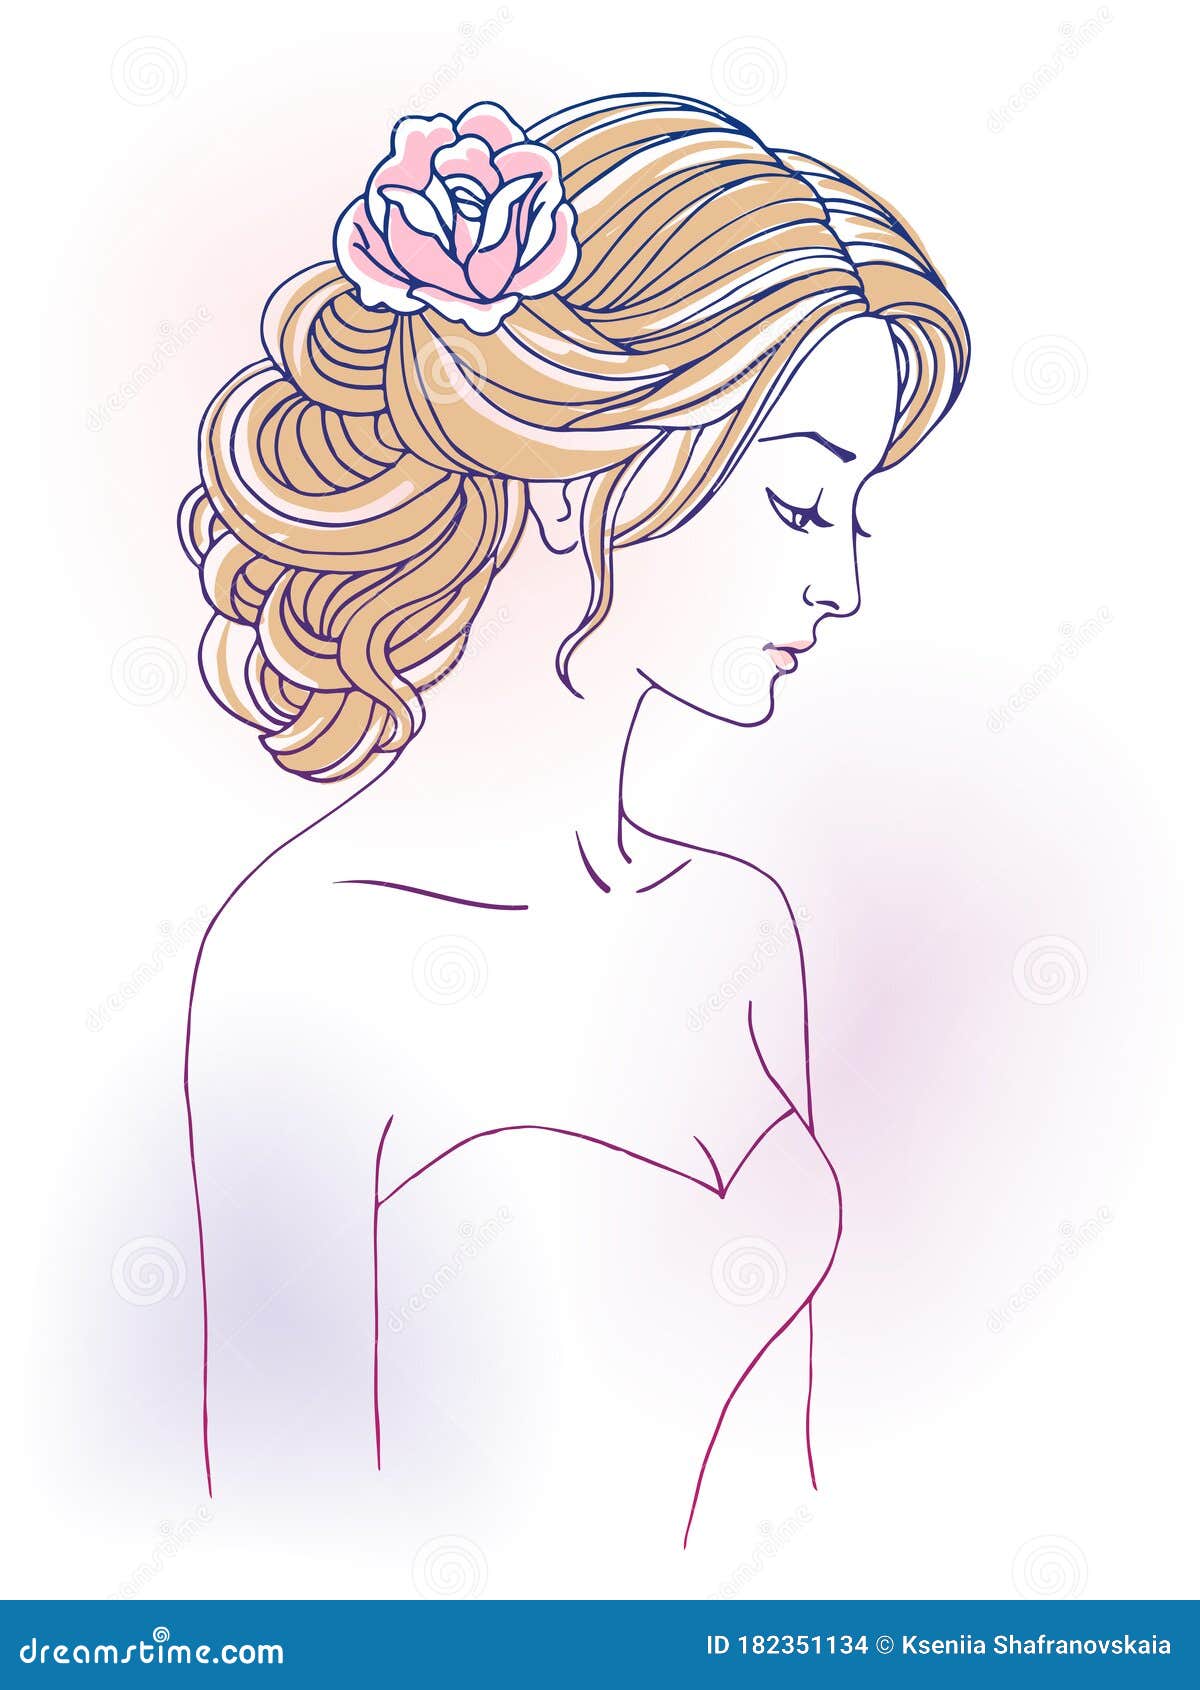 Girl in Profile with Wedding Hair Style with Flowers, Hand Drawn Sketch  Vector Illustration Stock Vector - Illustration of elegance, back: 182351134